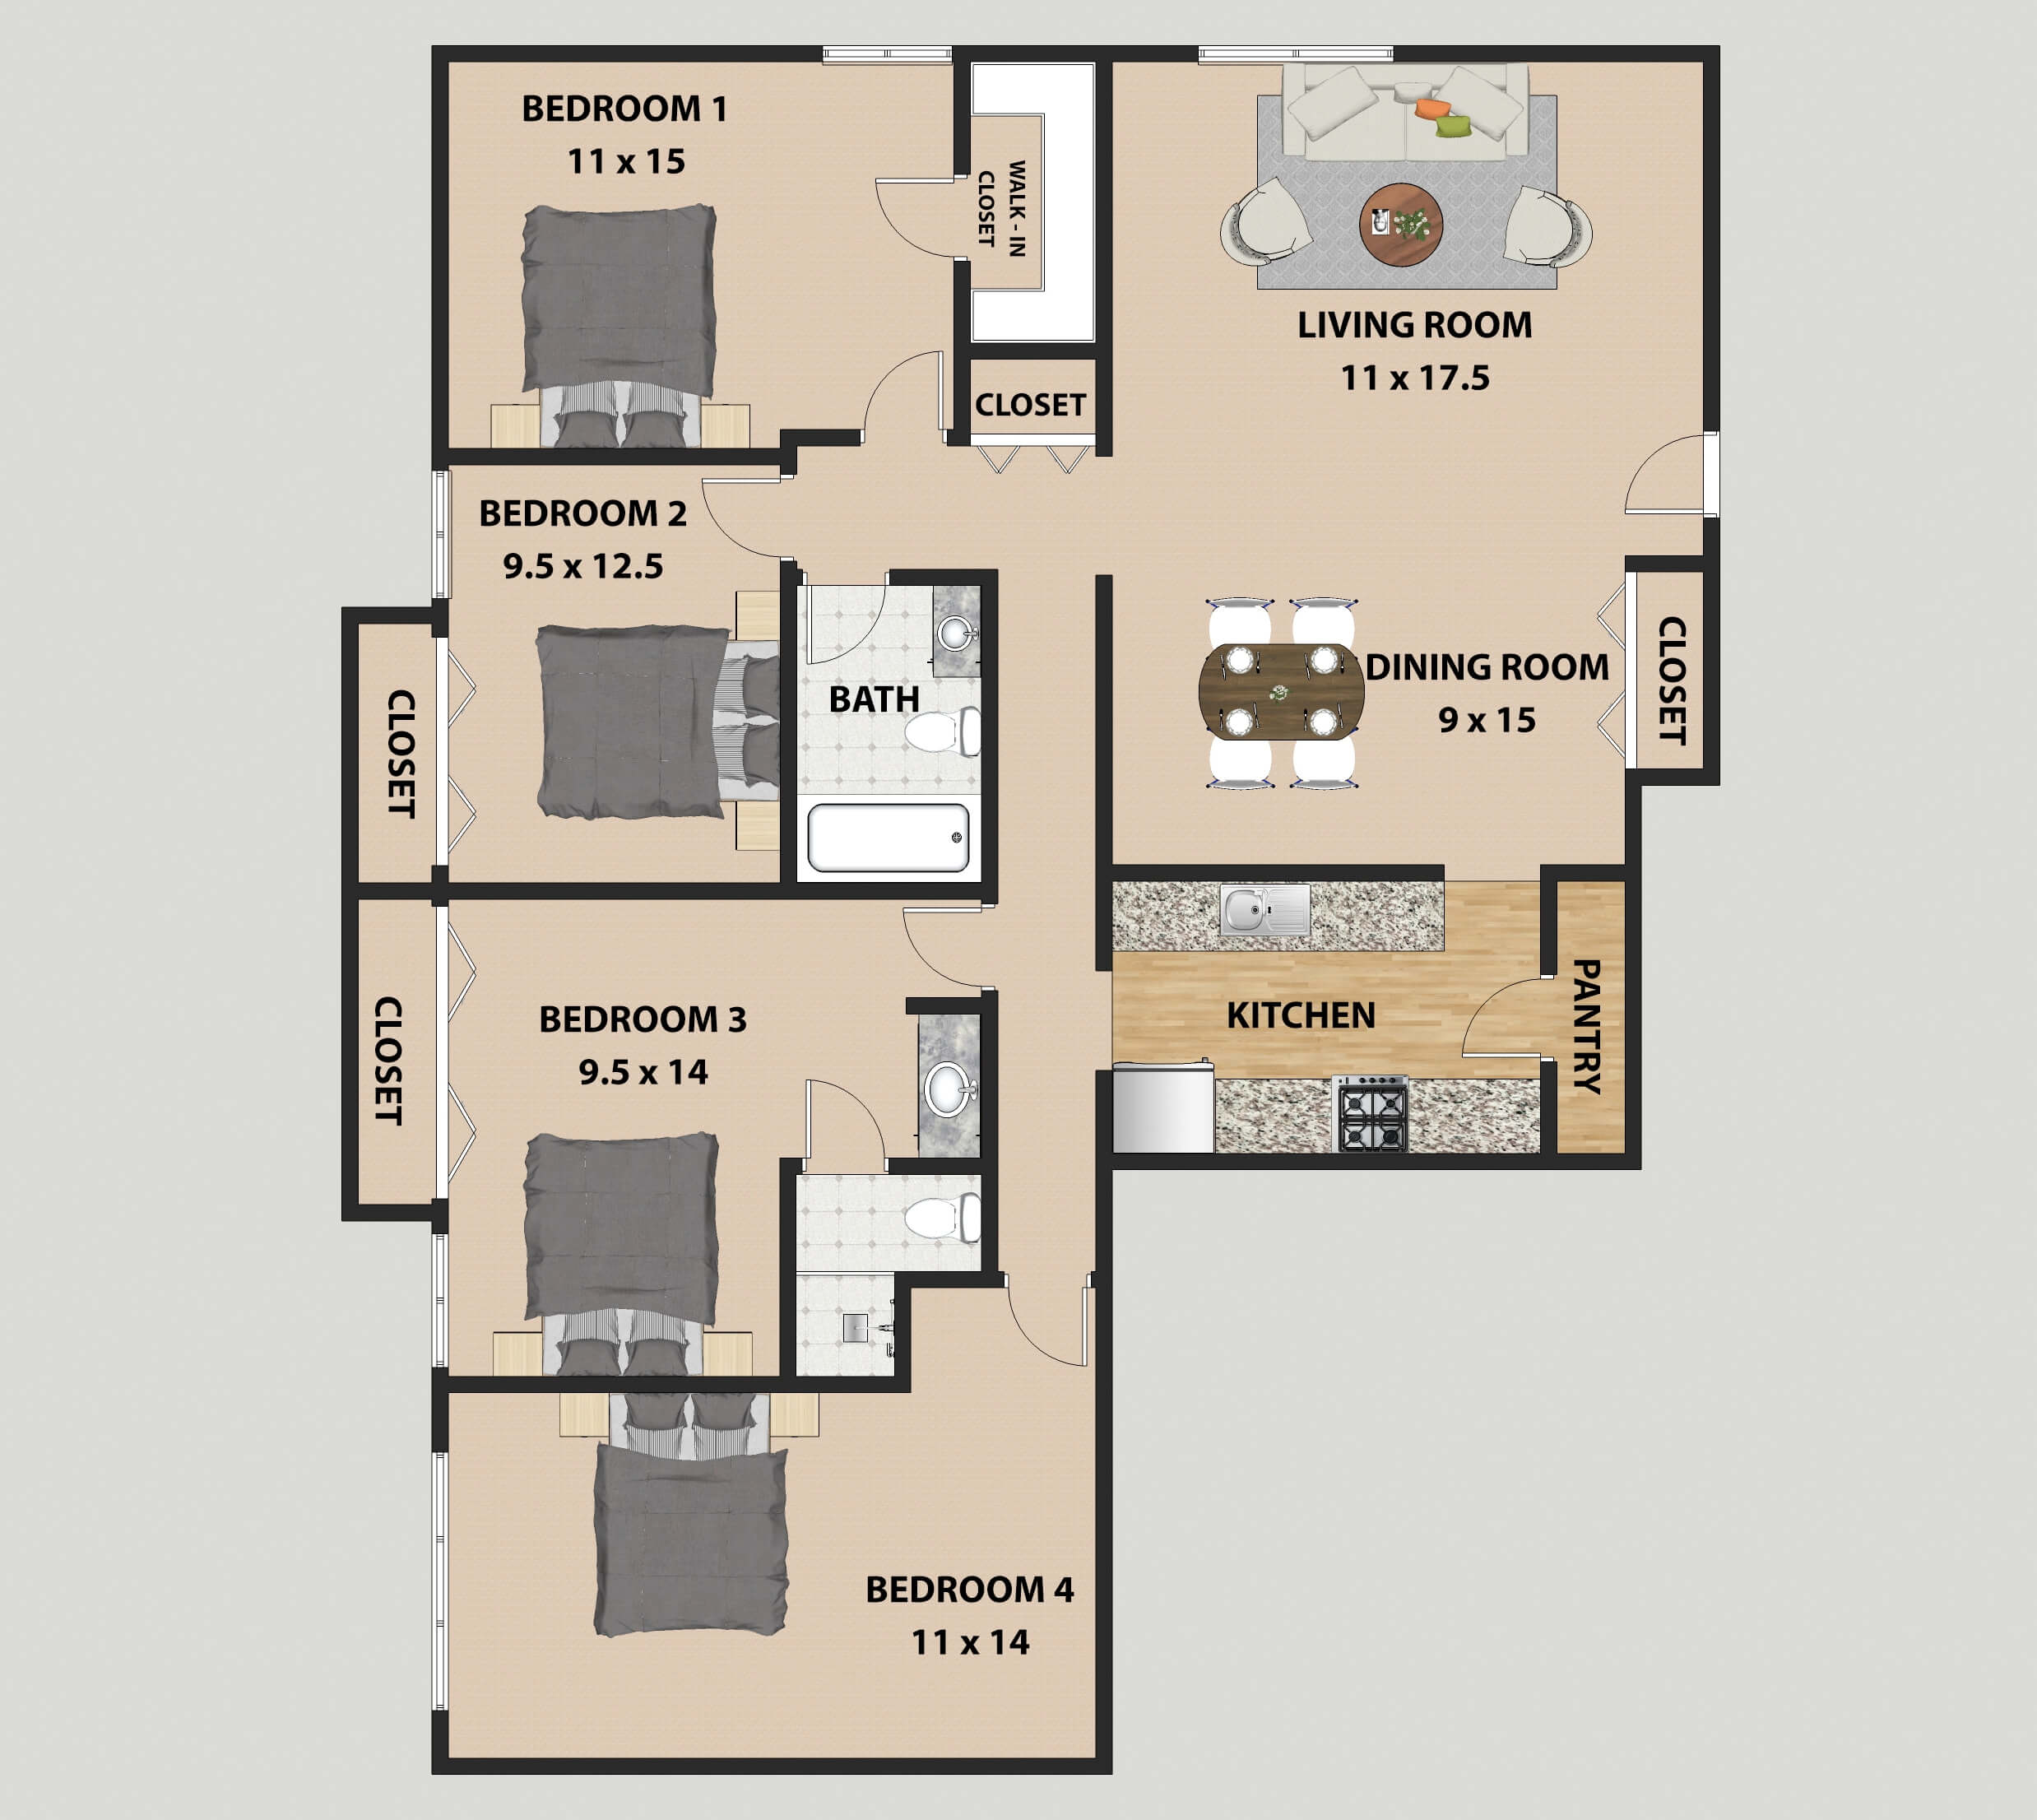 Floor Plans for Home Builders: How Important?